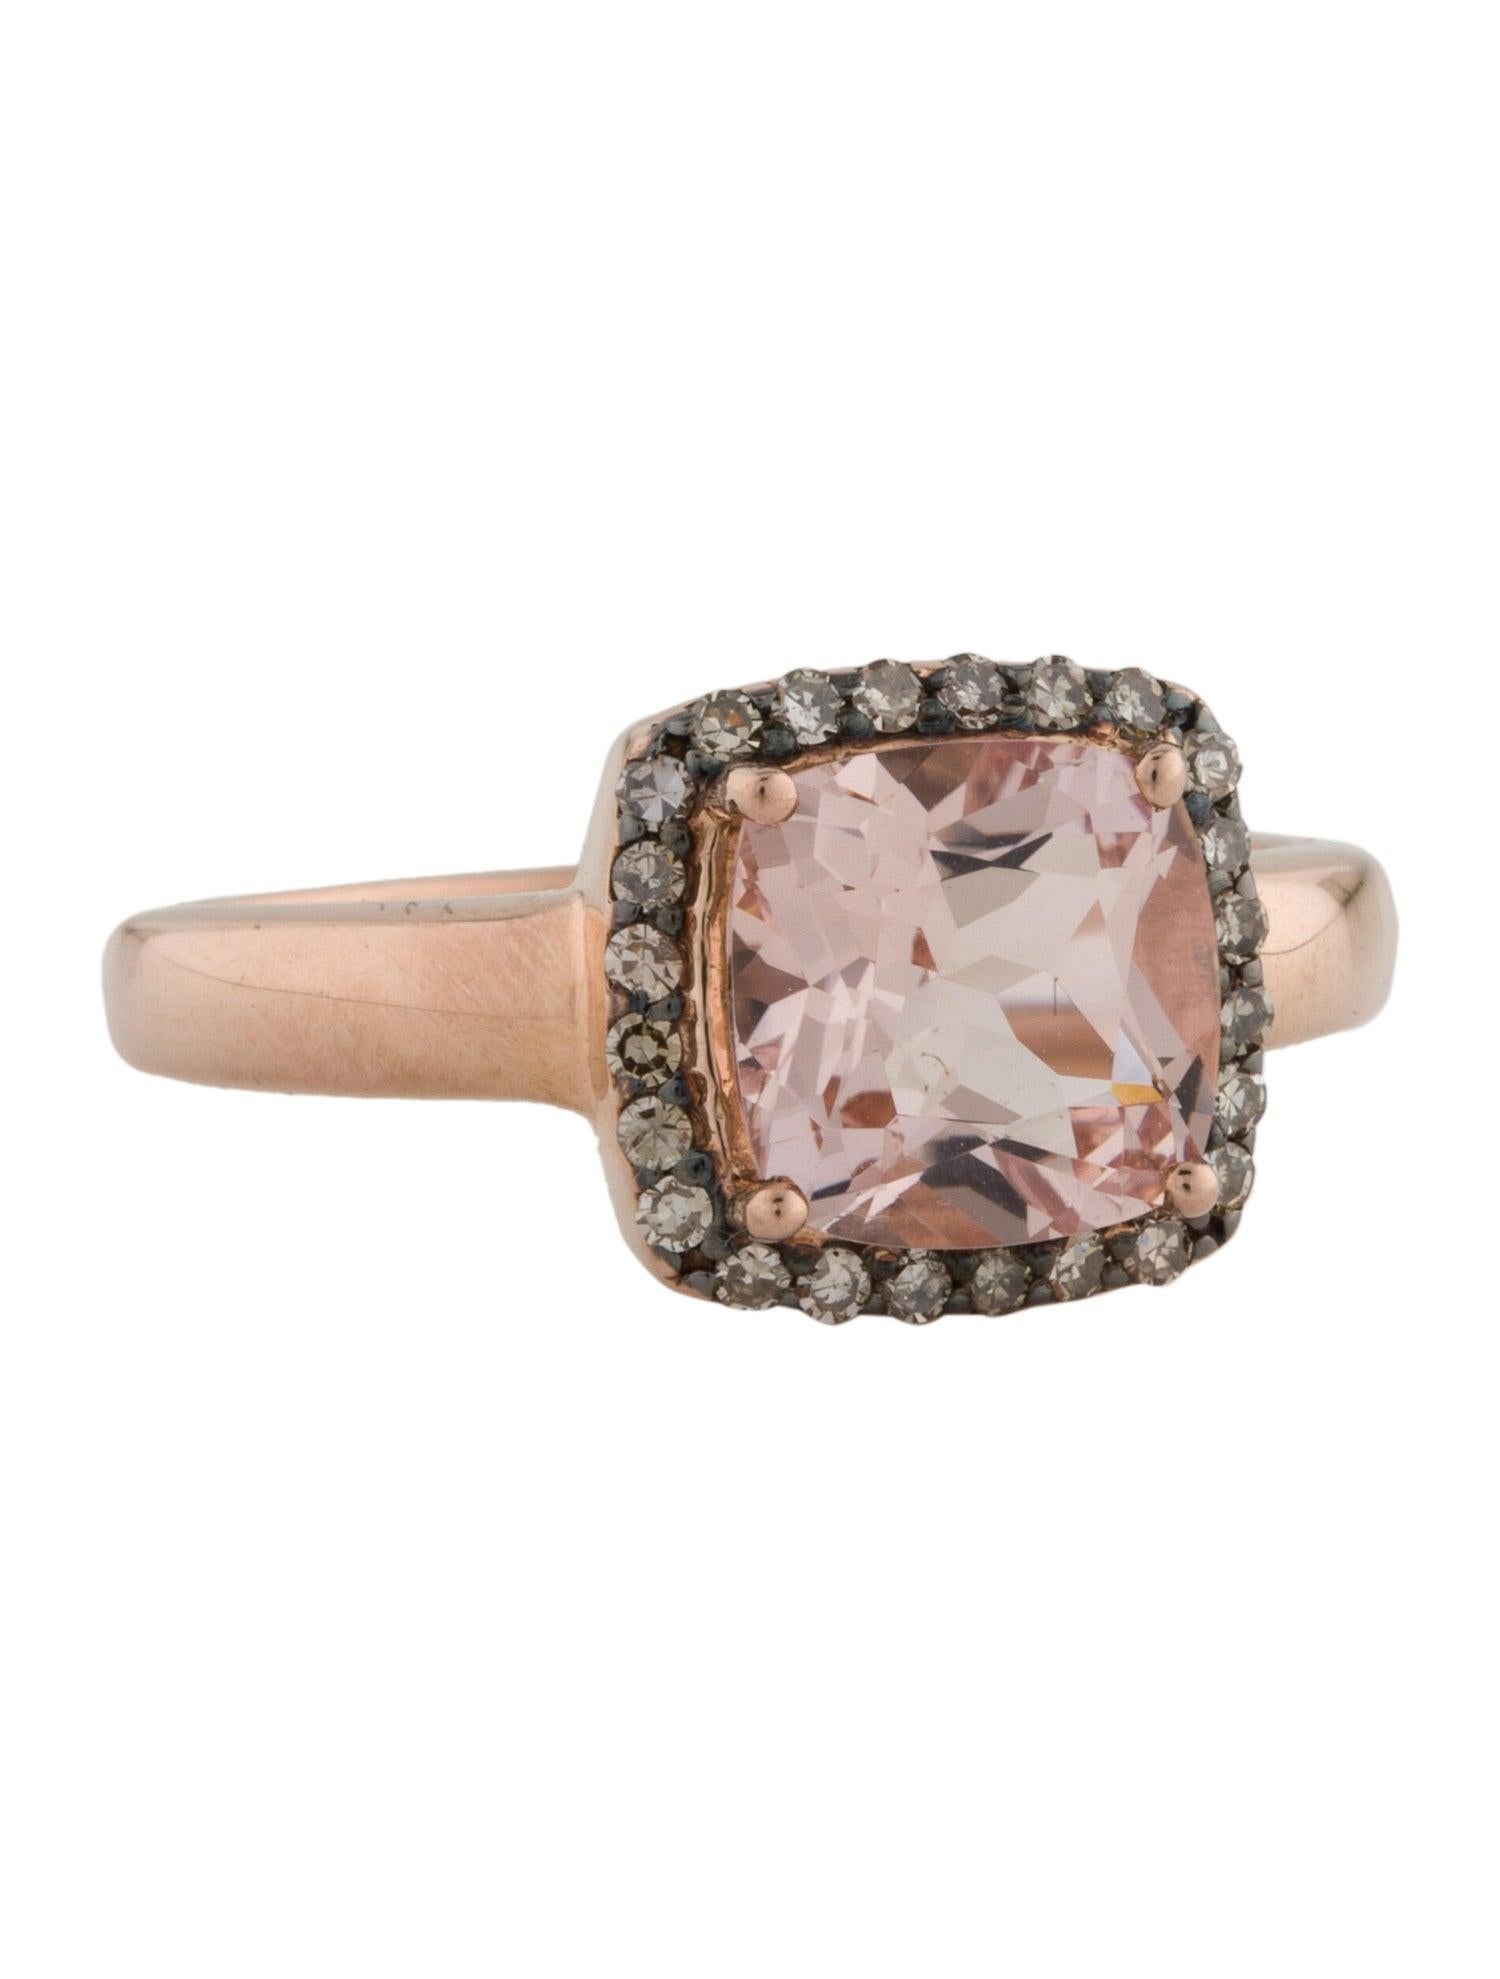 Embrace the tender beauty of dawn with our Elegant Pink Gemstone Grace ring, a mesmerizing creation that captures the essence of a gentle sunrise. Crafted with precision and passion, this exquisite ring features a stunning 2.3 carat Morganite